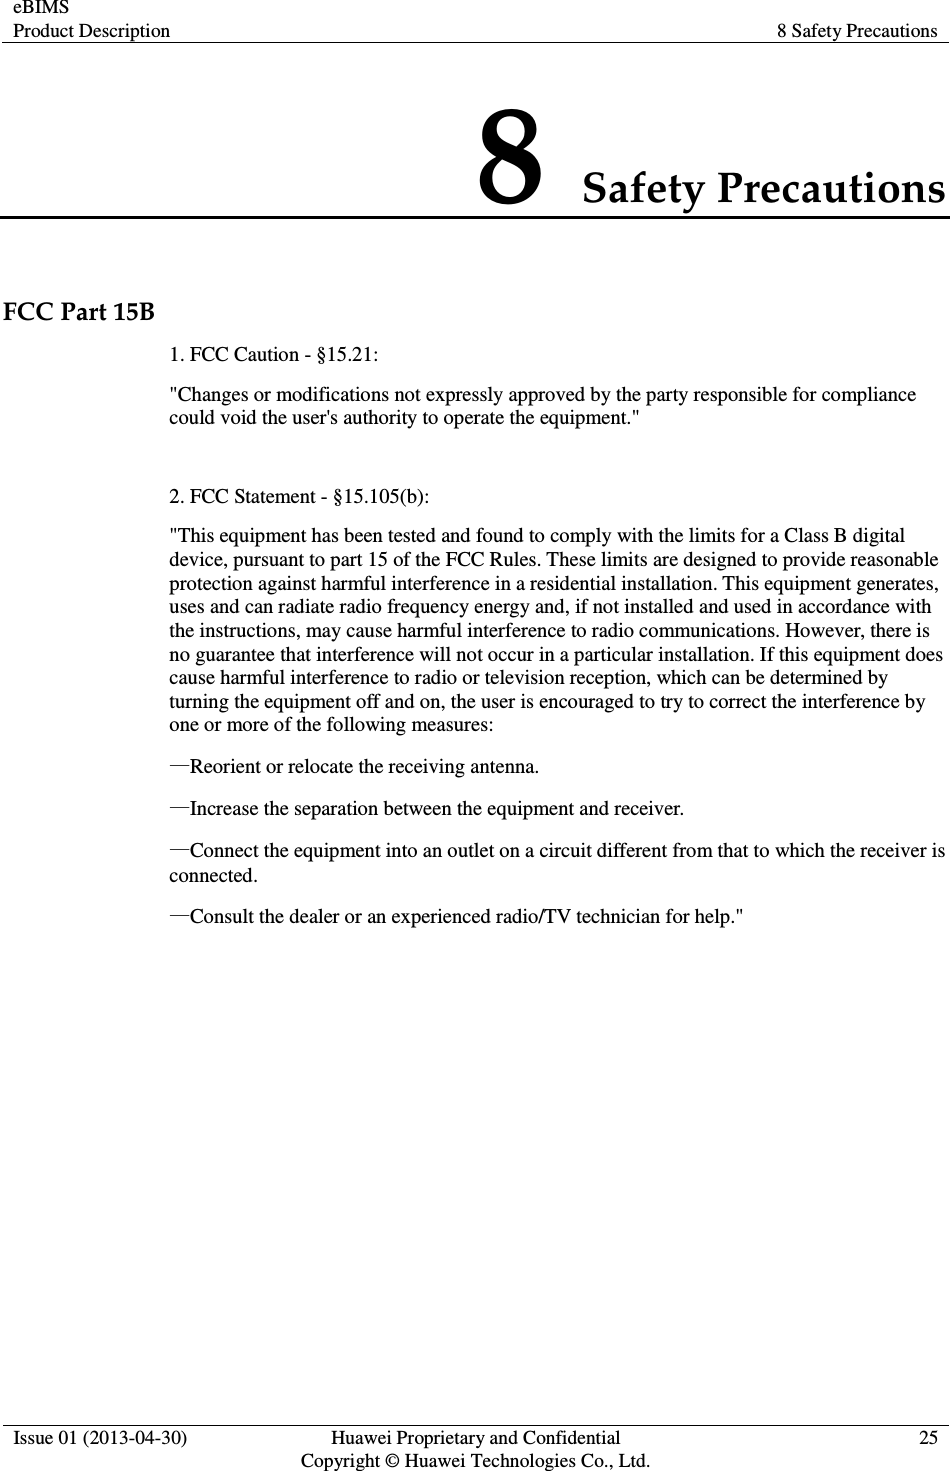 eBIMS Product Description  8 Safety Precautions  Issue 01 (2013-04-30)  Huawei Proprietary and Confidential                                     Copyright © Huawei Technologies Co., Ltd. 25  8 Safety Precautions FCC Part 15B 1. FCC Caution - §15.21: &quot;Changes or modifications not expressly approved by the party responsible for compliance could void the user&apos;s authority to operate the equipment.&quot;  2. FCC Statement - §15.105(b): &quot;This equipment has been tested and found to comply with the limits for a Class B digital device, pursuant to part 15 of the FCC Rules. These limits are designed to provide reasonable protection against harmful interference in a residential installation. This equipment generates, uses and can radiate radio frequency energy and, if not installed and used in accordance with the instructions, may cause harmful interference to radio communications. However, there is no guarantee that interference will not occur in a particular installation. If this equipment does cause harmful interference to radio or television reception, which can be determined by turning the equipment off and on, the user is encouraged to try to correct the interference by one or more of the following measures: —Reorient or relocate the receiving antenna. —Increase the separation between the equipment and receiver. —Connect the equipment into an outlet on a circuit different from that to which the receiver is connected. —Consult the dealer or an experienced radio/TV technician for help.&quot;  